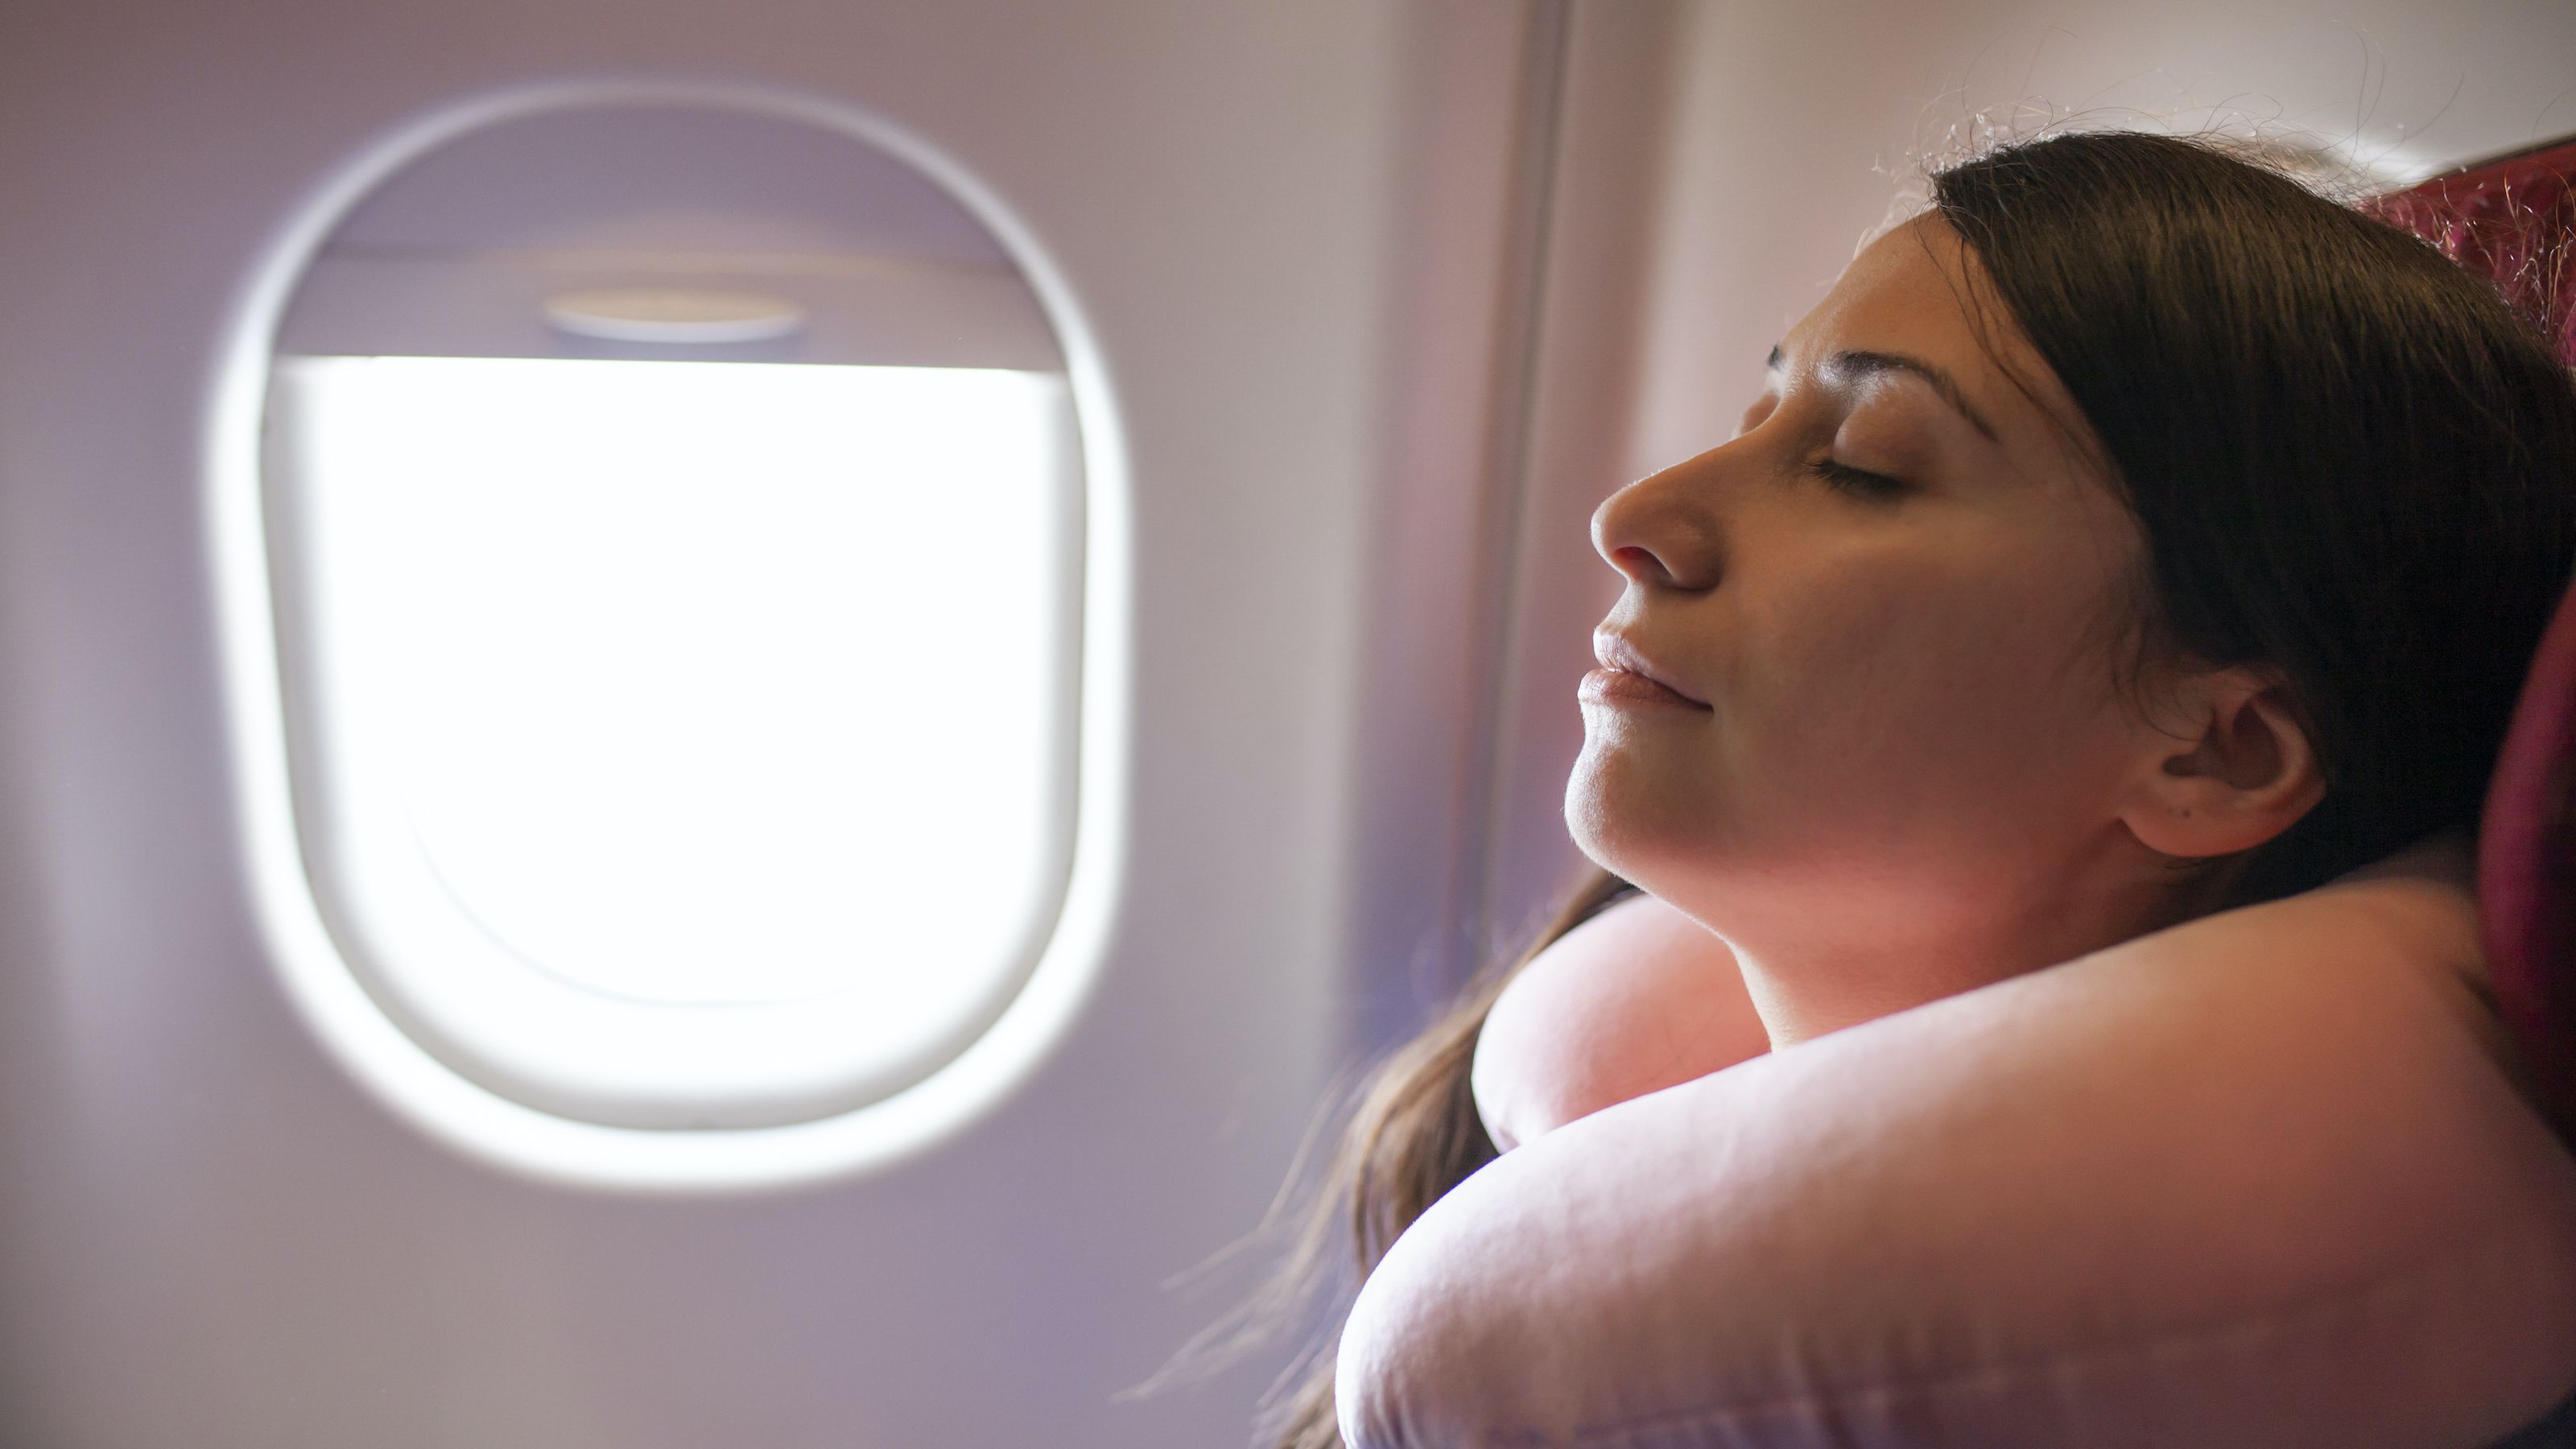 6 Tips for Getting Better Sleep While Traveling